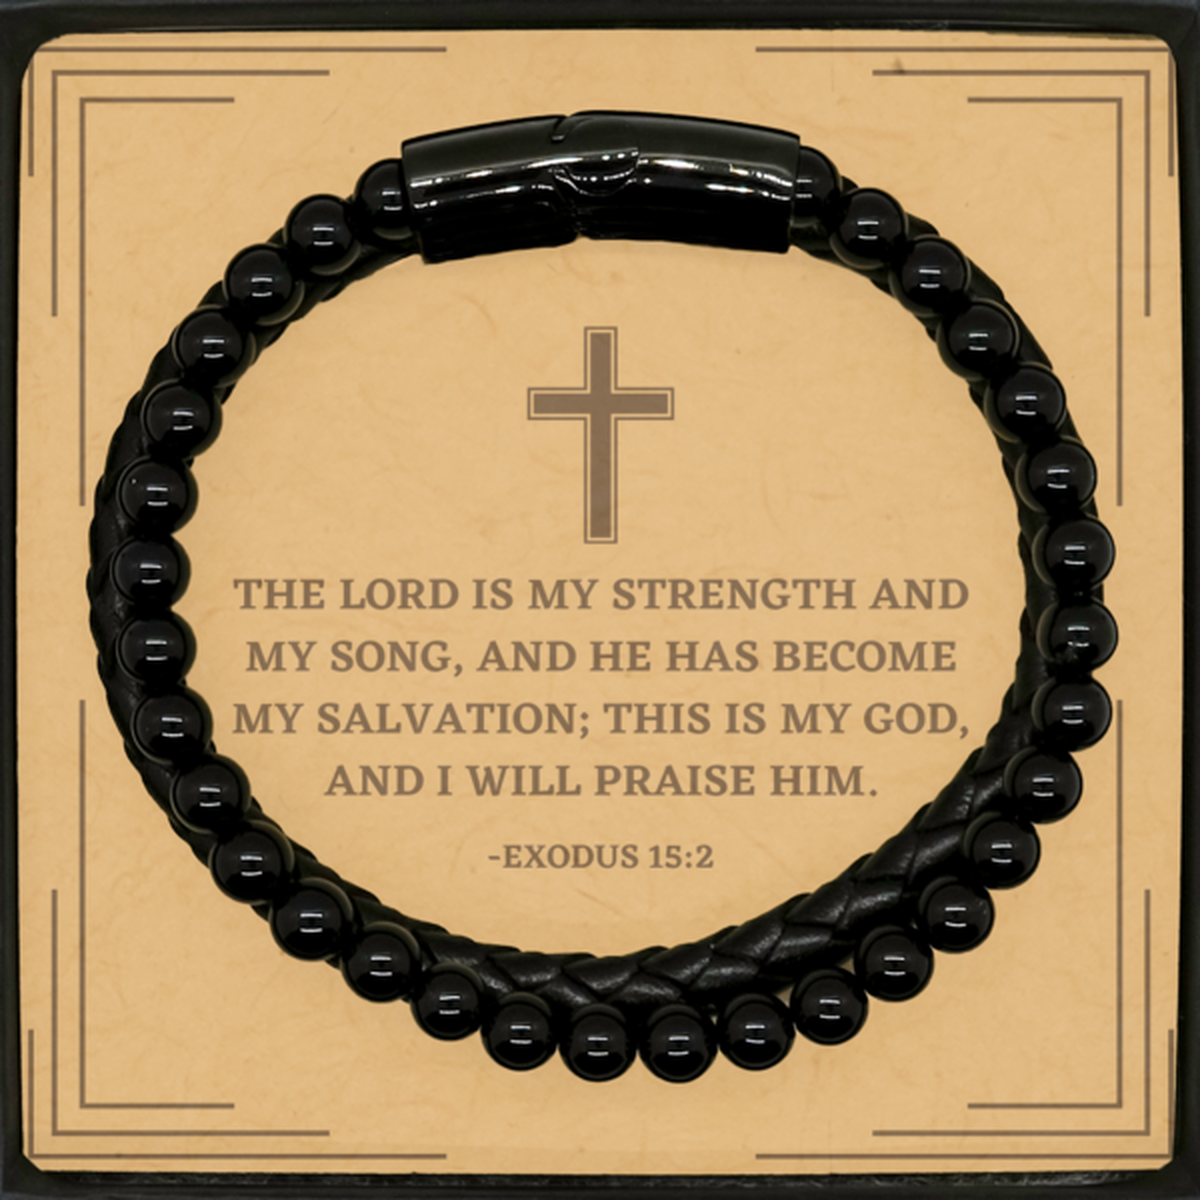 Baptism Gifts For Teenage Boys Girls, Christian Bible Verse Stone Leather Bracelet, The Lord is my strength, Confirmation Gifts, Bible Verse Card for Son, Godson, Grandson